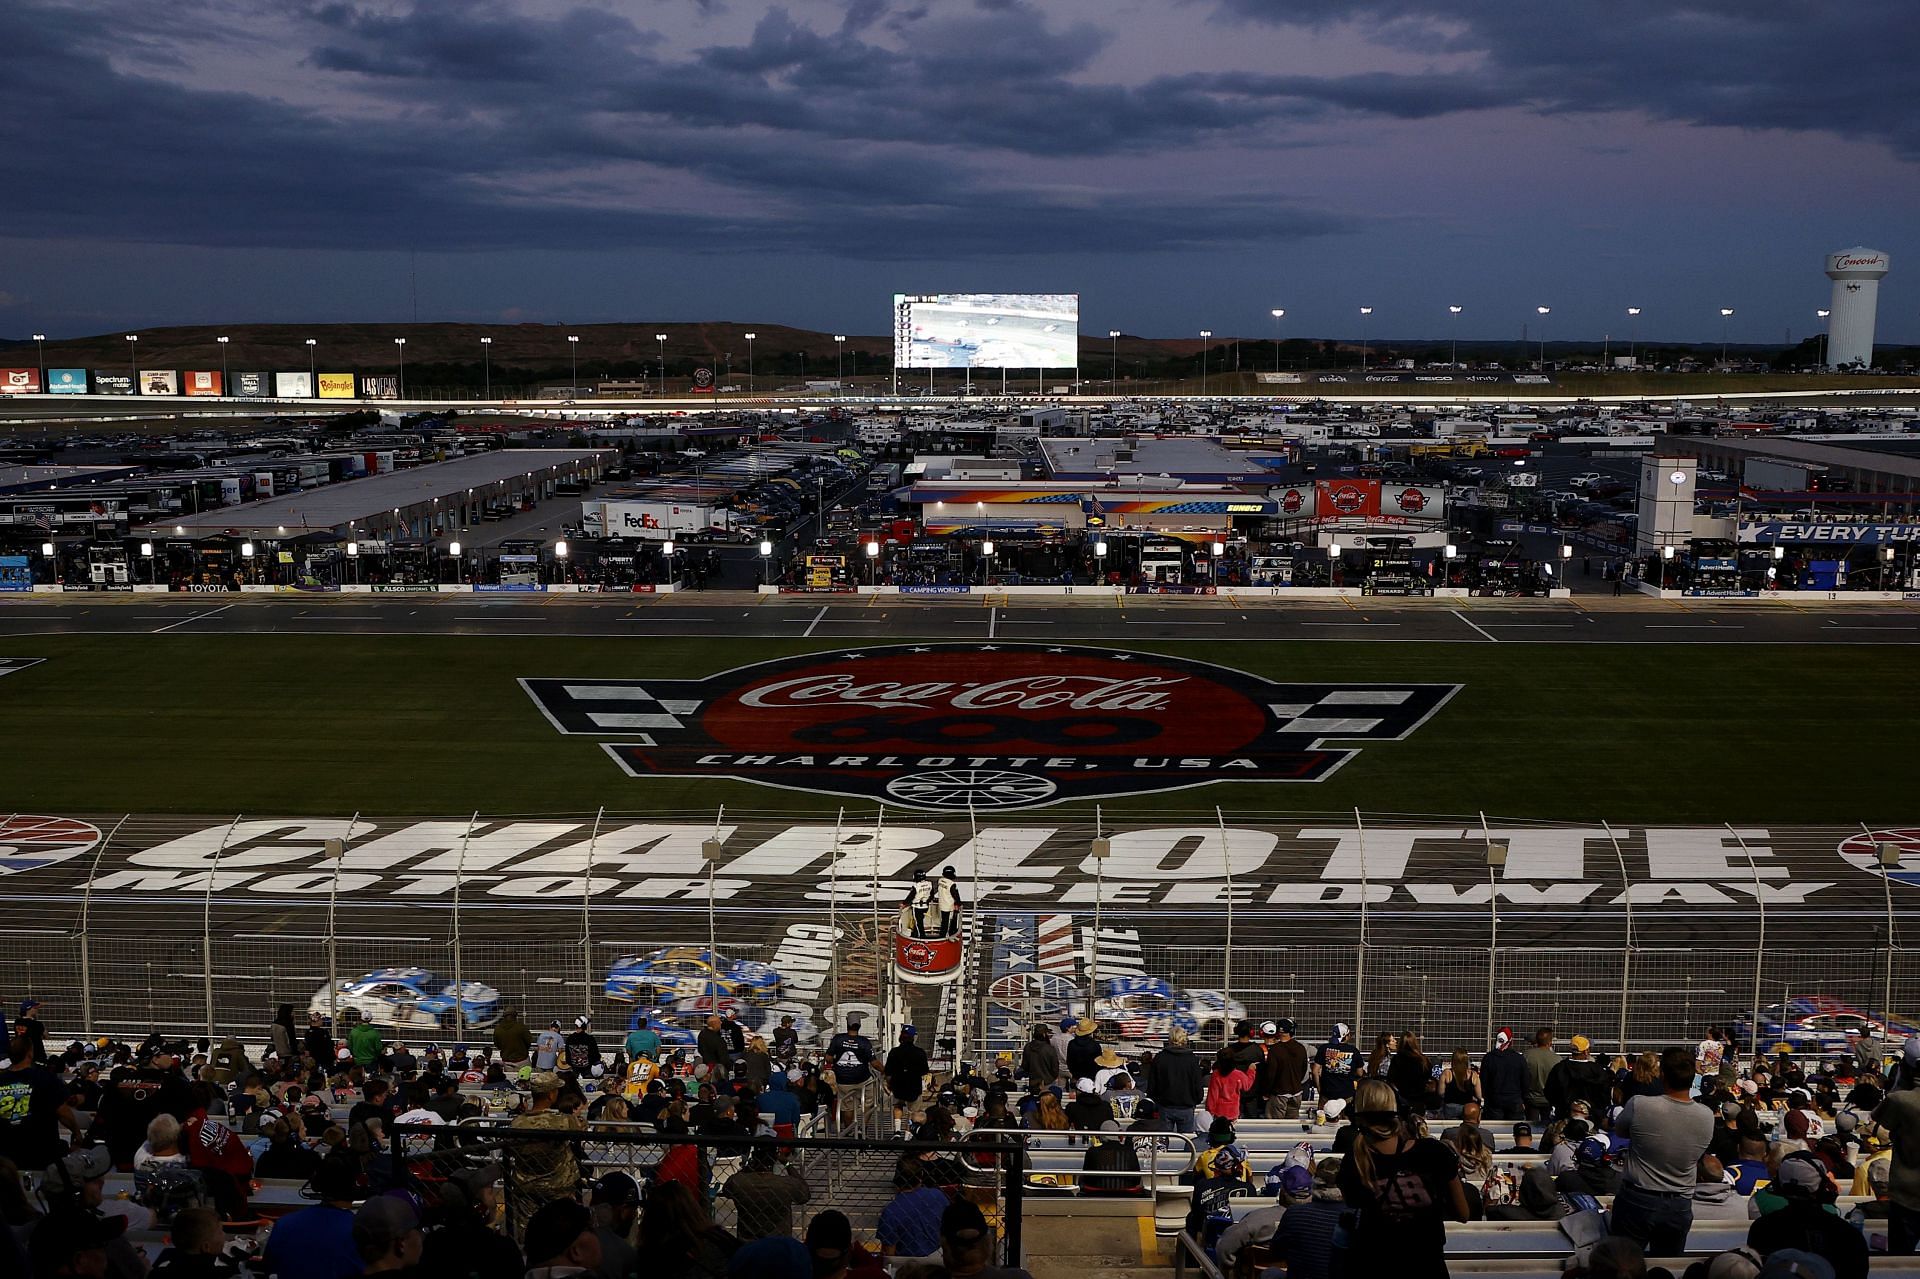 A general view from the grandstands of the race during the NASCAR Cup Series Coca-Cola 600 at Charlotte Motor Speedway